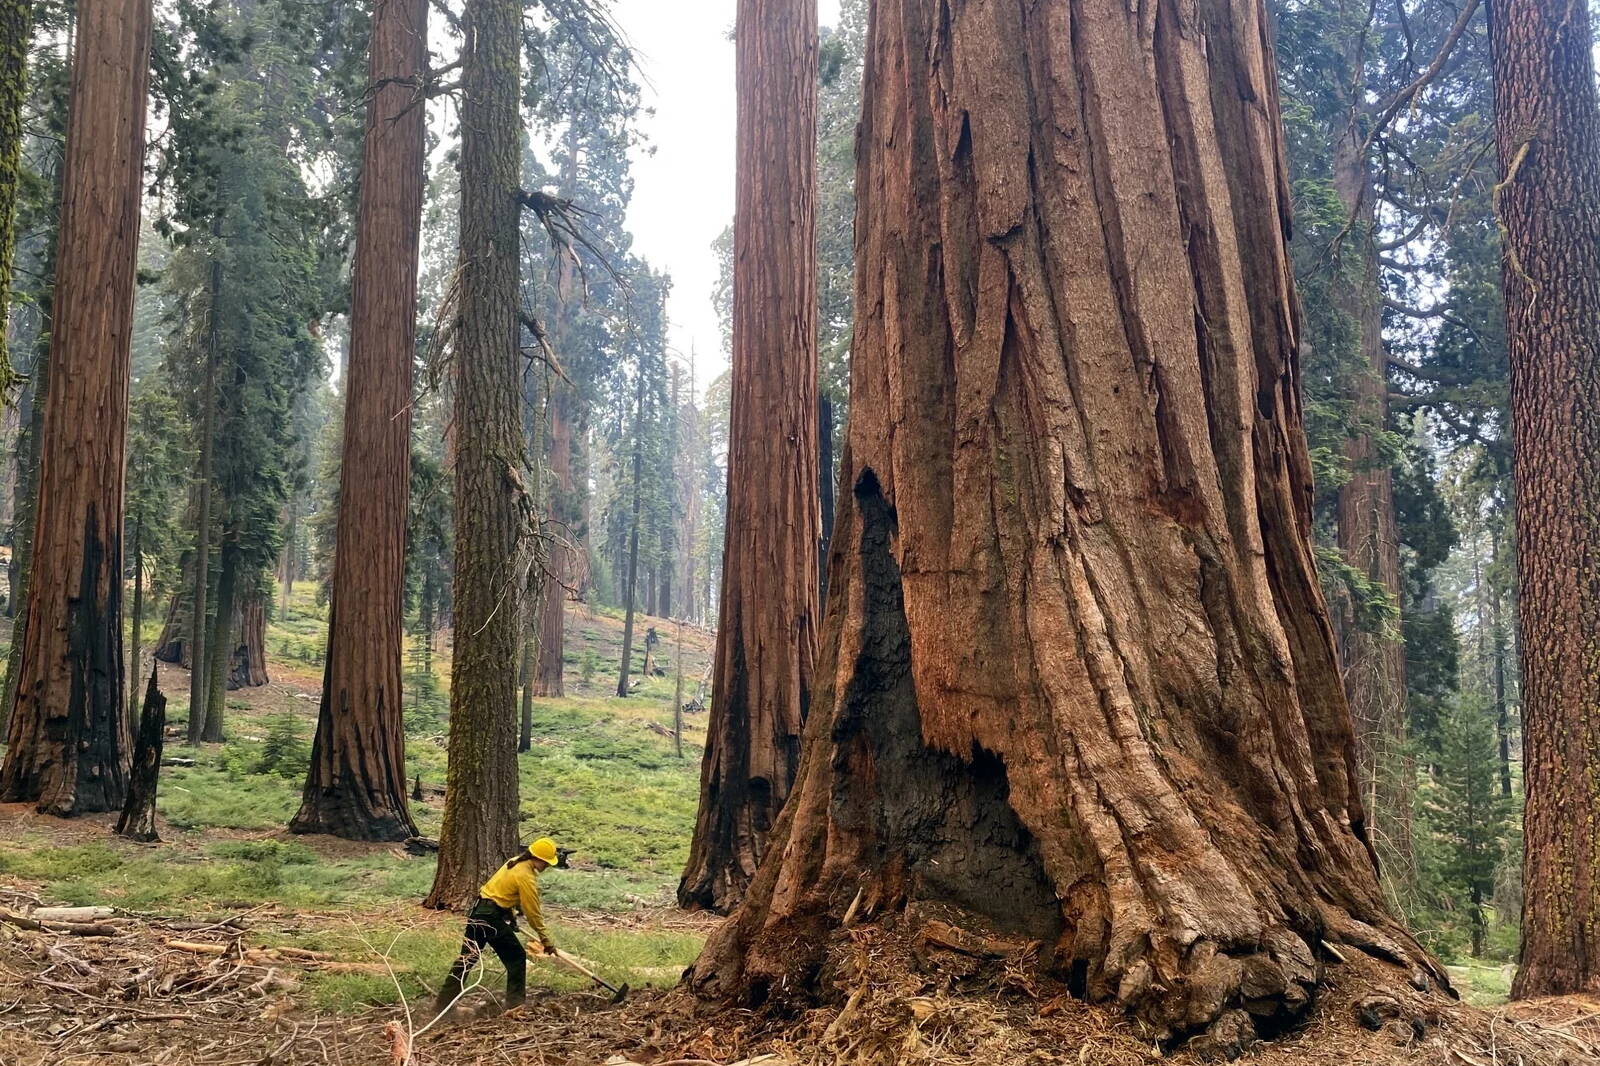 A firefighter clears loose brush from around a sequoia tree in Mariposa Grove in Yosemite National Park, Calif., in July 2022. (Garrett Dickman/National Park Service)